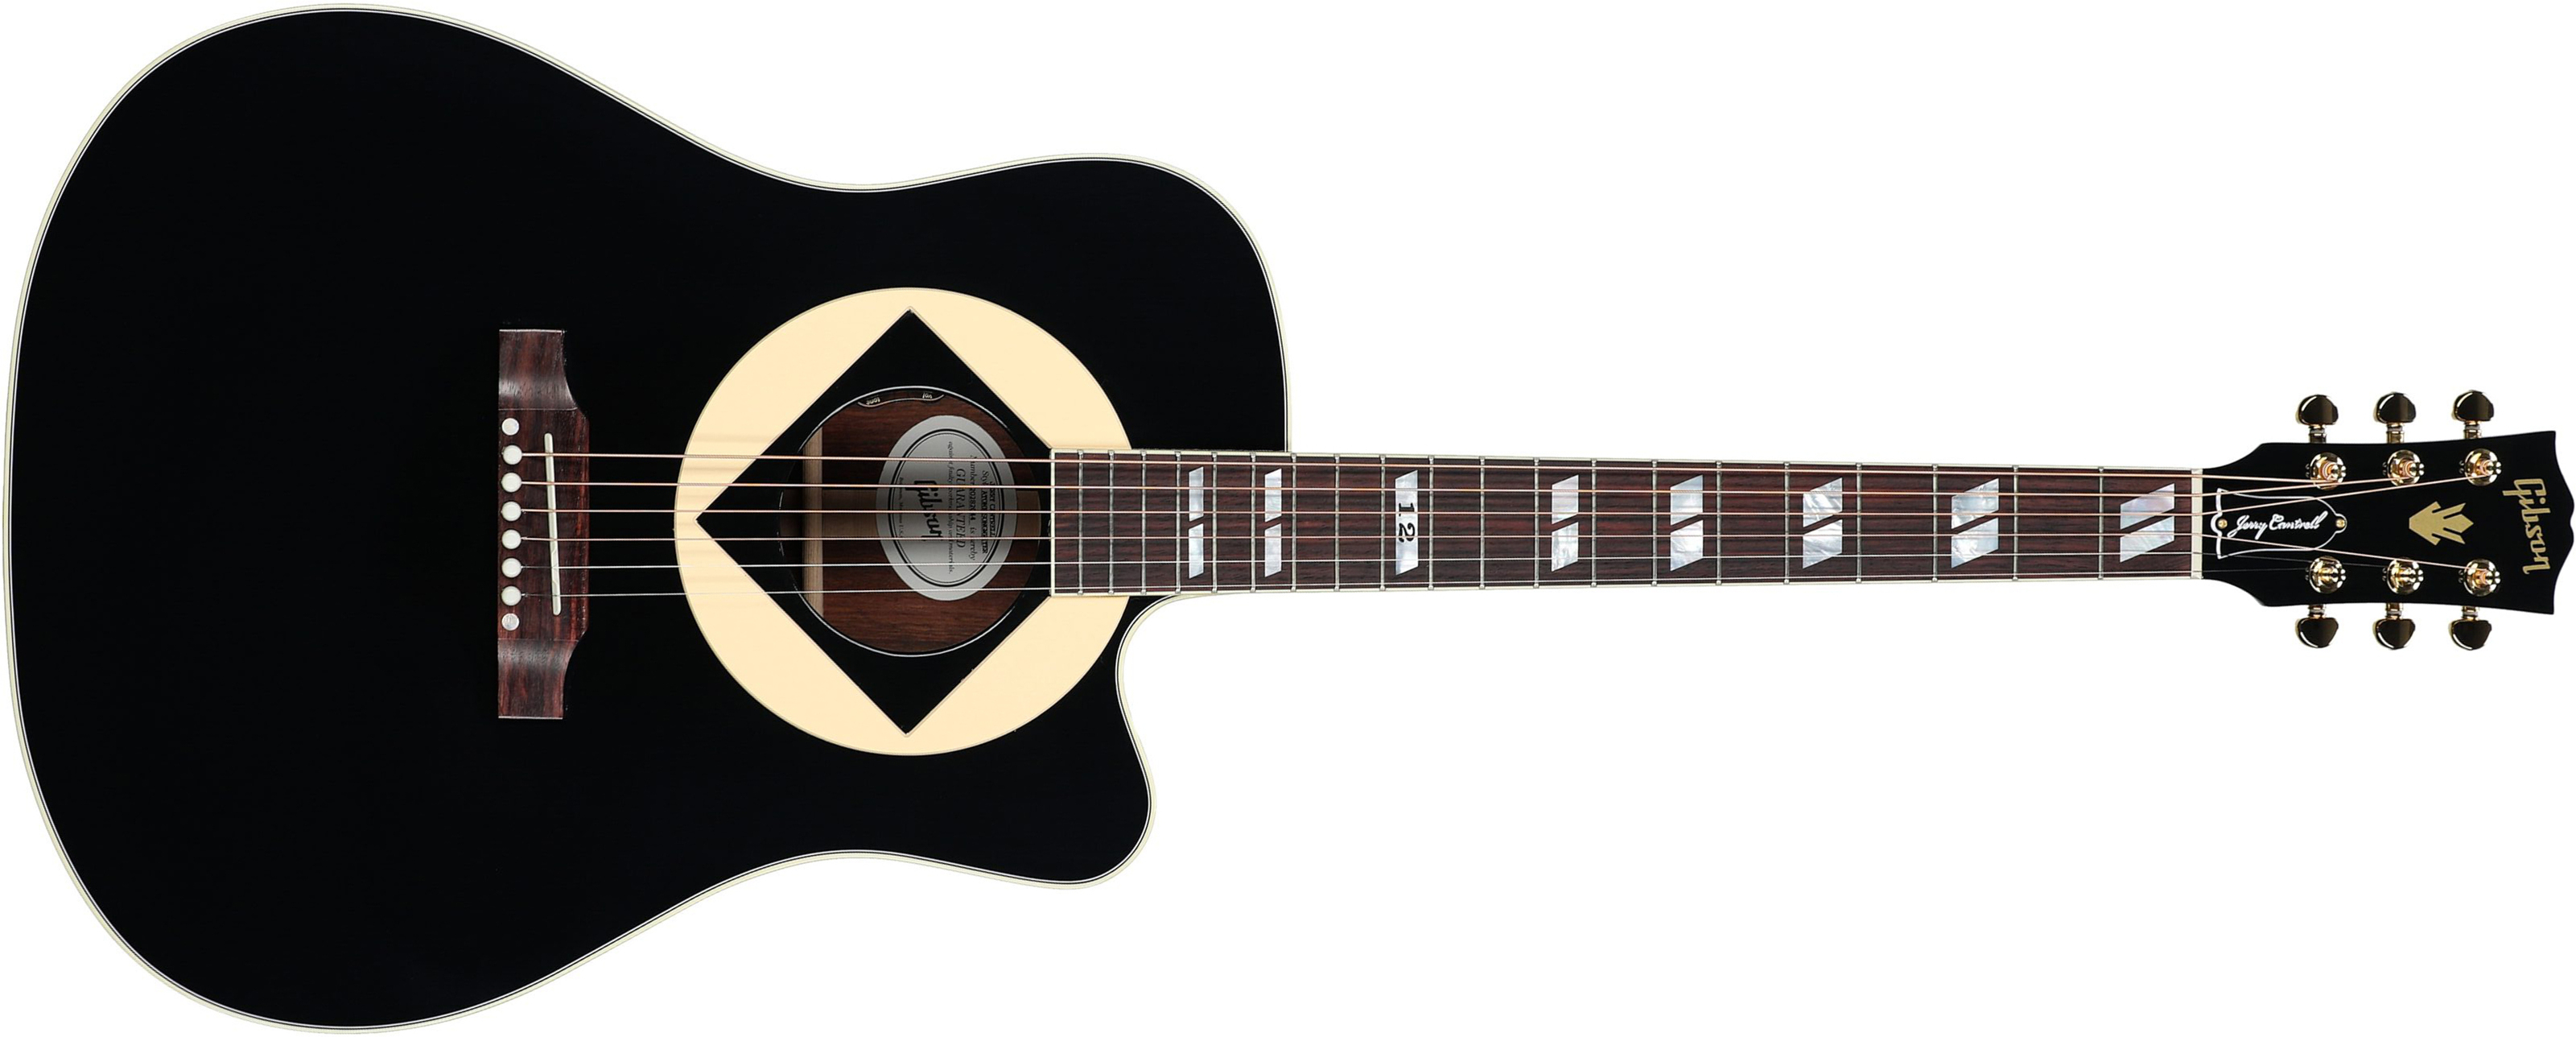 Gibson Jerry Cantrell Songwriter Atone Signature Dreadnought Cw Epicea Palissandre Rw - Ebony - Guitarra acústica & electro - Main picture